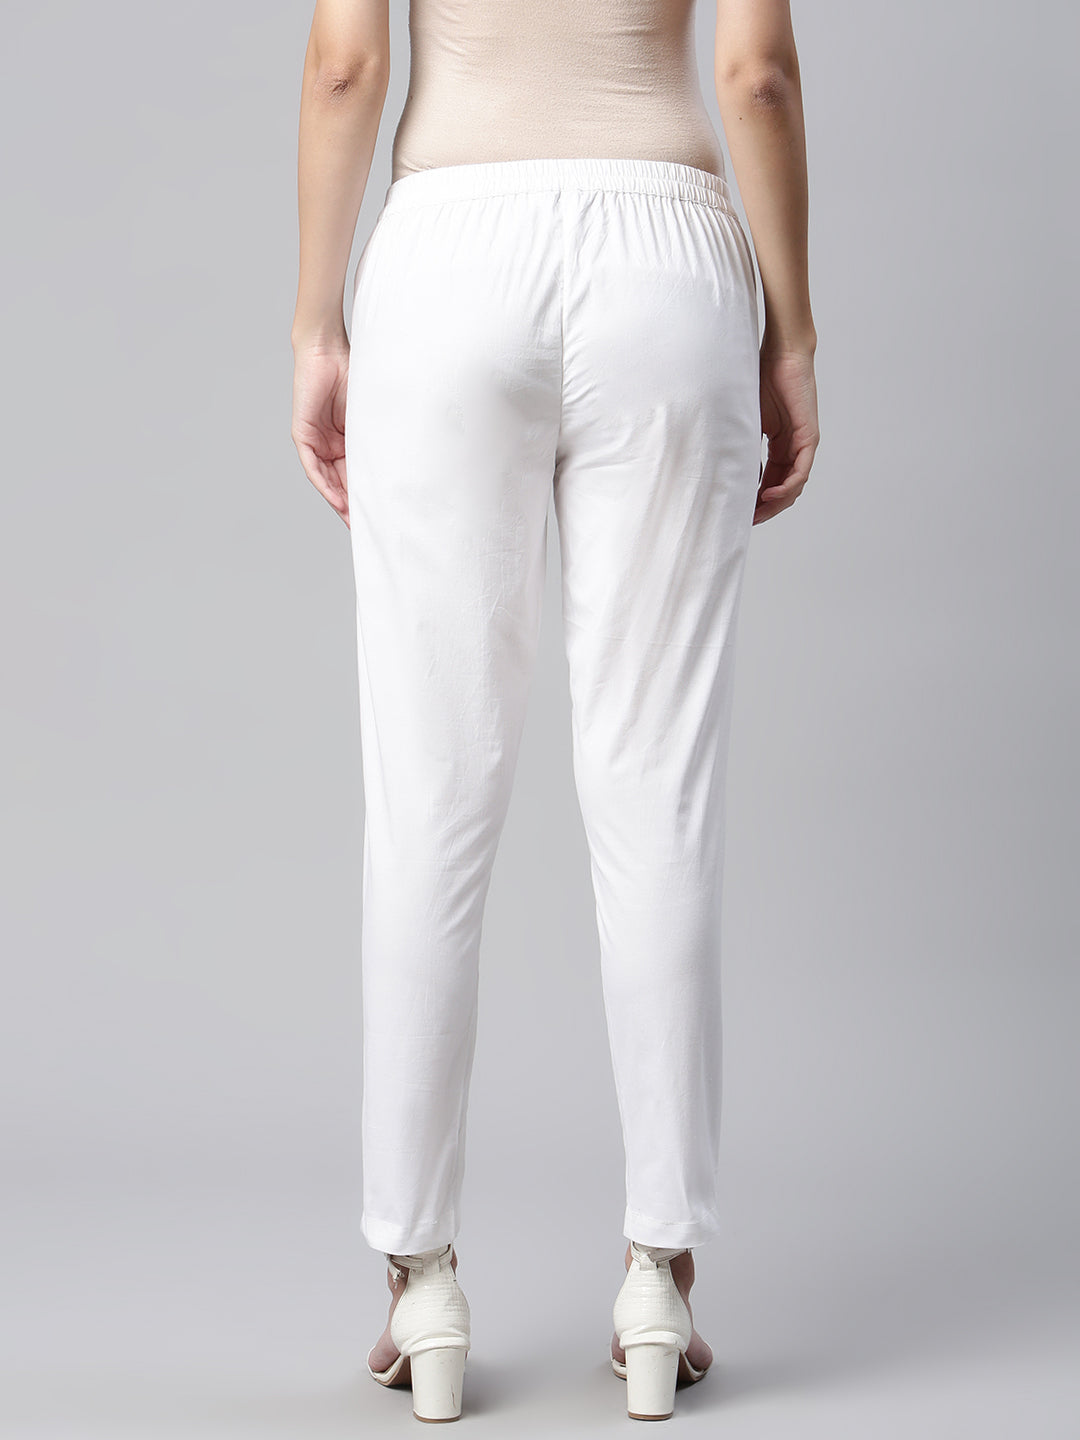 Buy RARE RABBIT White Solid Cotton Slim Fit Men's Casual Trousers |  Shoppers Stop